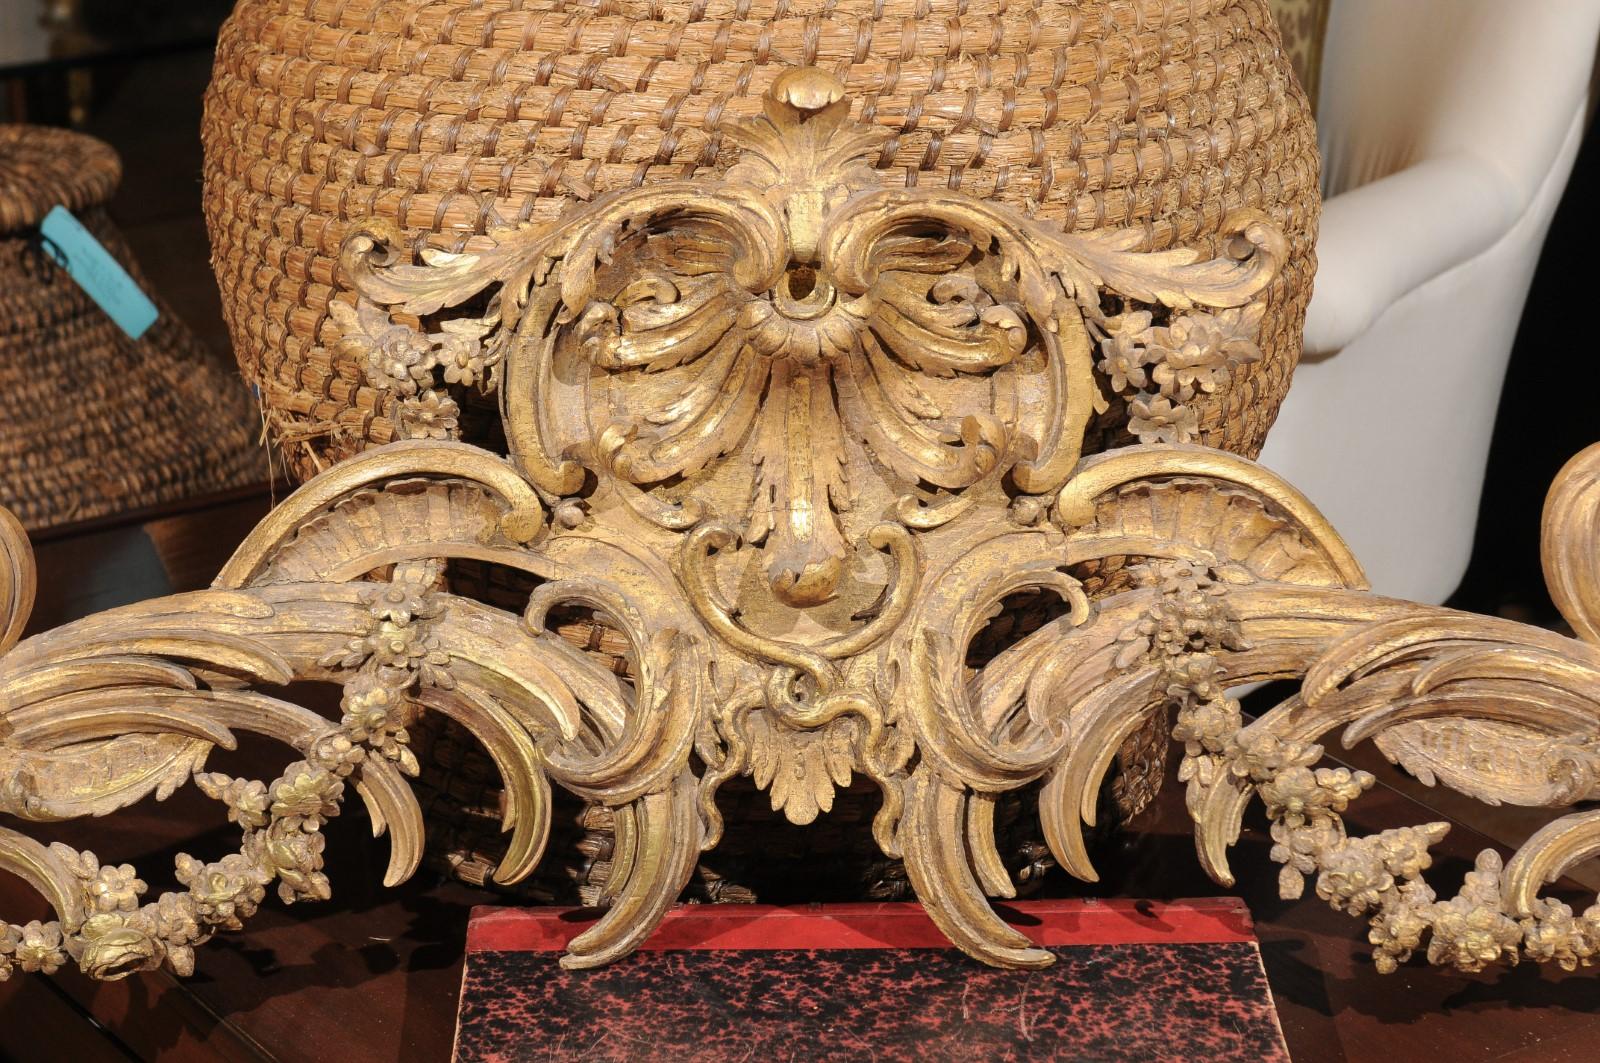 French Rococo Style Parcel-Gilt Carved Architectural Swag from the 19th Century (Geschnitzt)